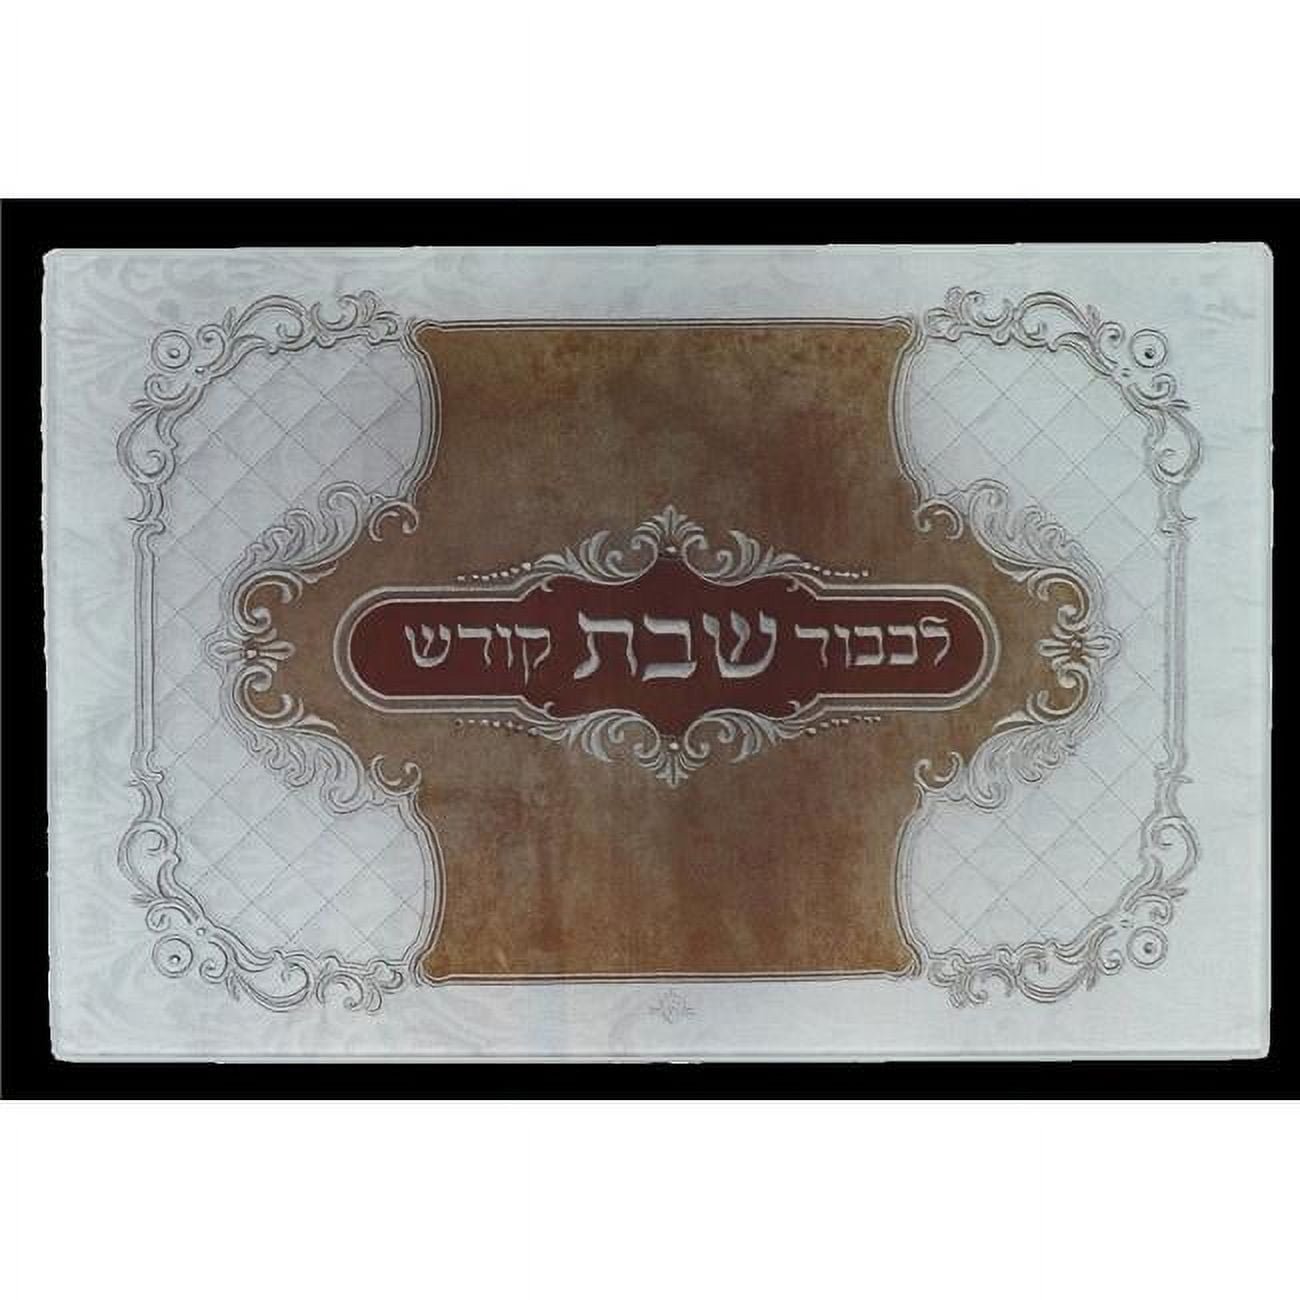 Picture of Nua 58338 13.5 x 9.5 in. Glass Leather Look Challah Board, Medium